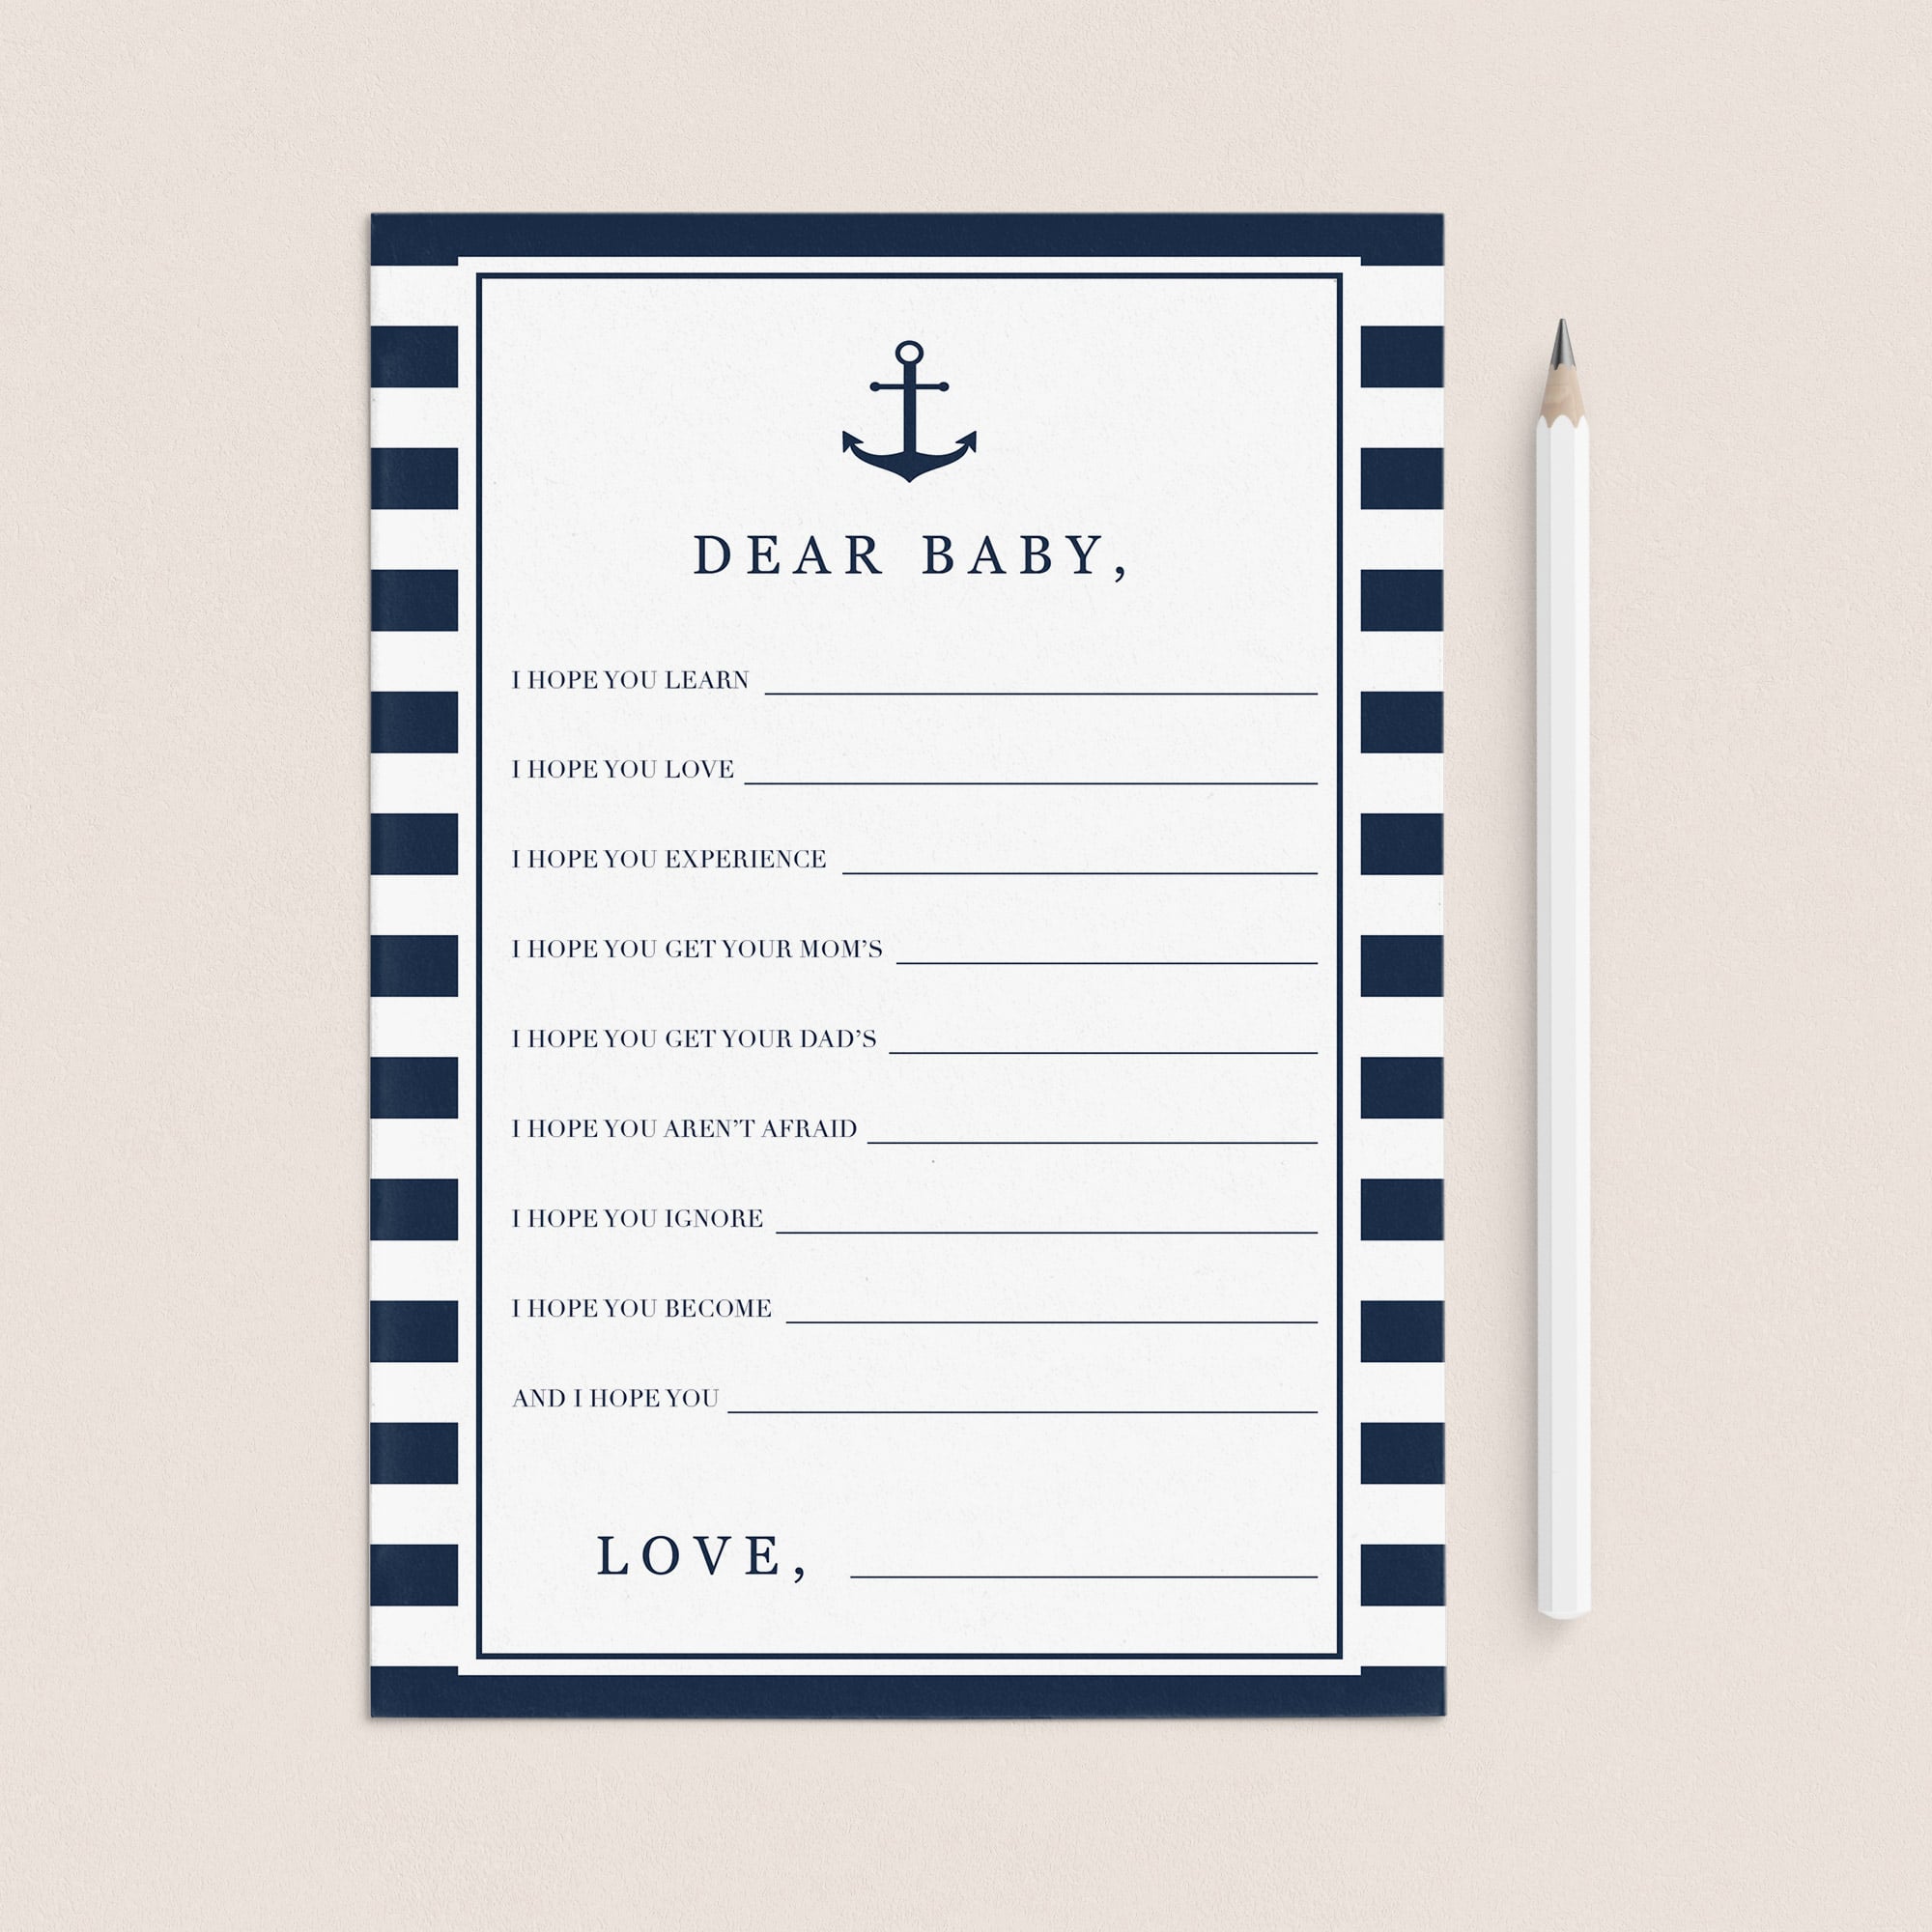 Nautical baby shower wishes for the new baby printable by LittleSizzle